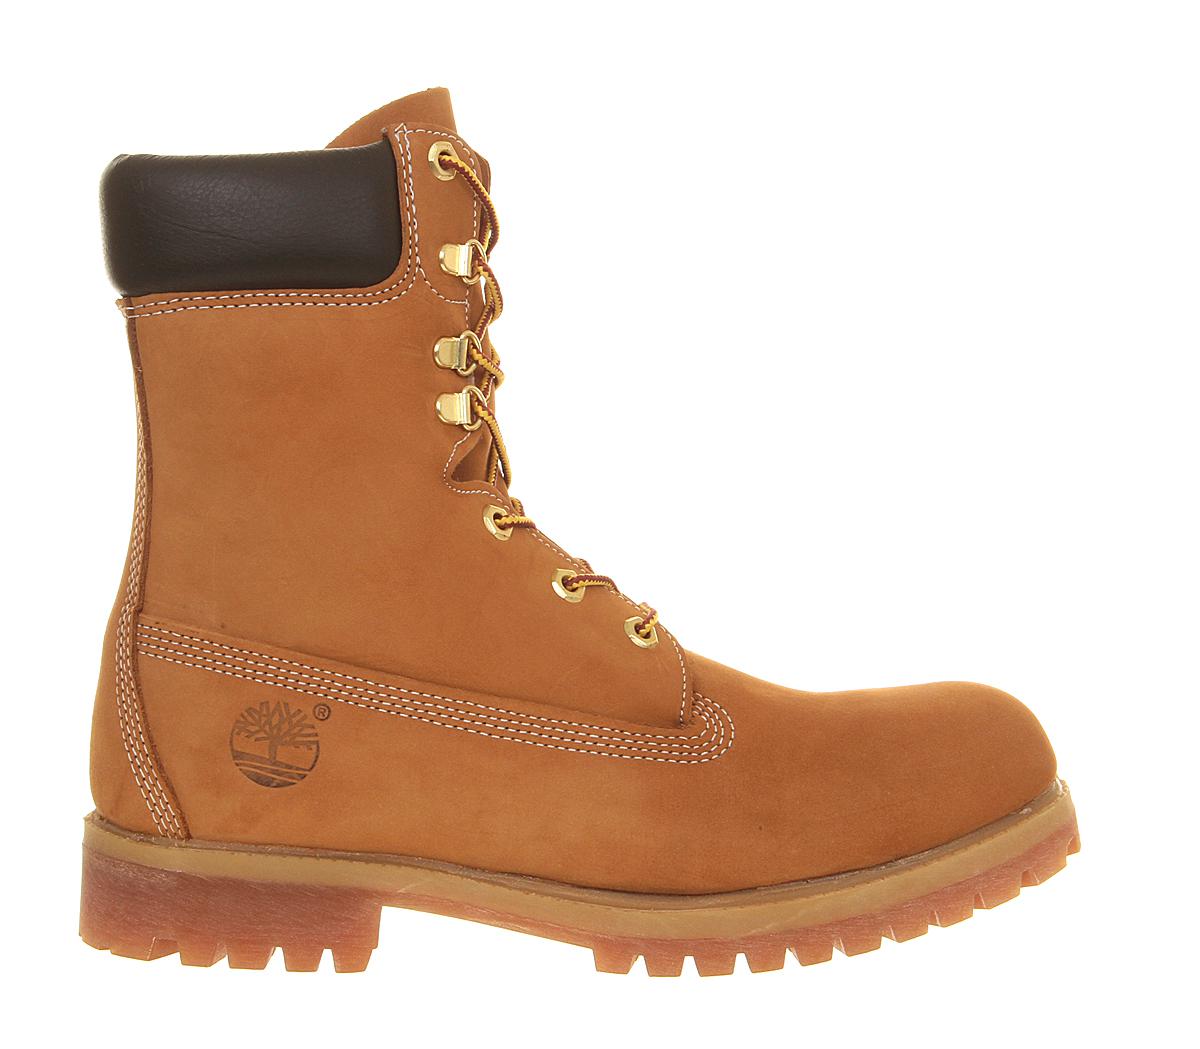 Timberland 8 Inch Boots in Brown for Men - Lyst